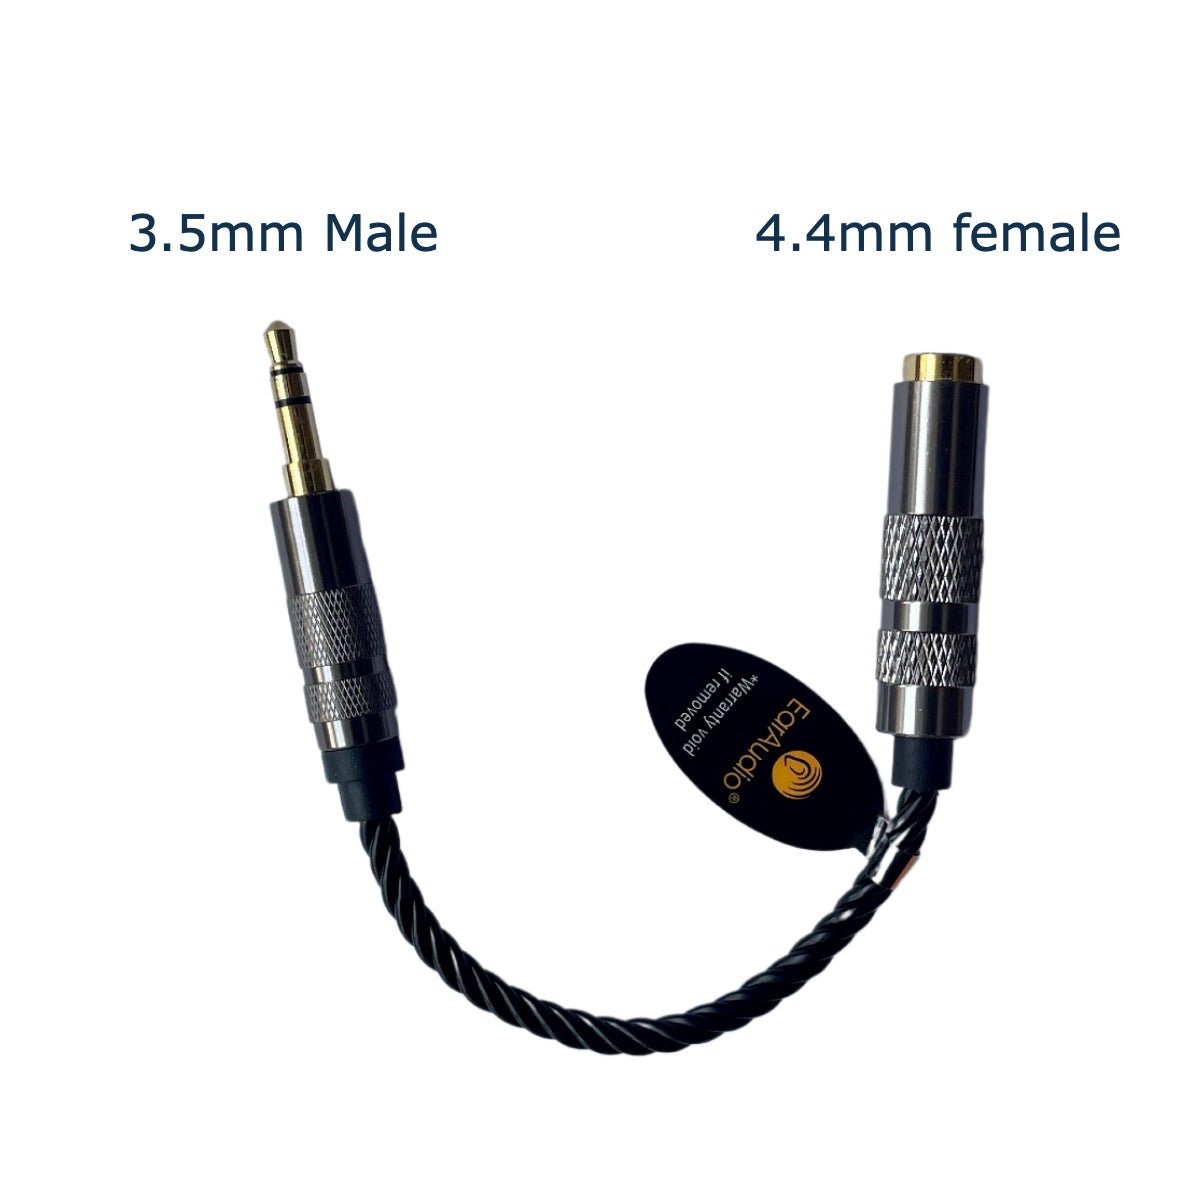 EarAudio 3.5mm Male to 4.4mm female Adapter Cable